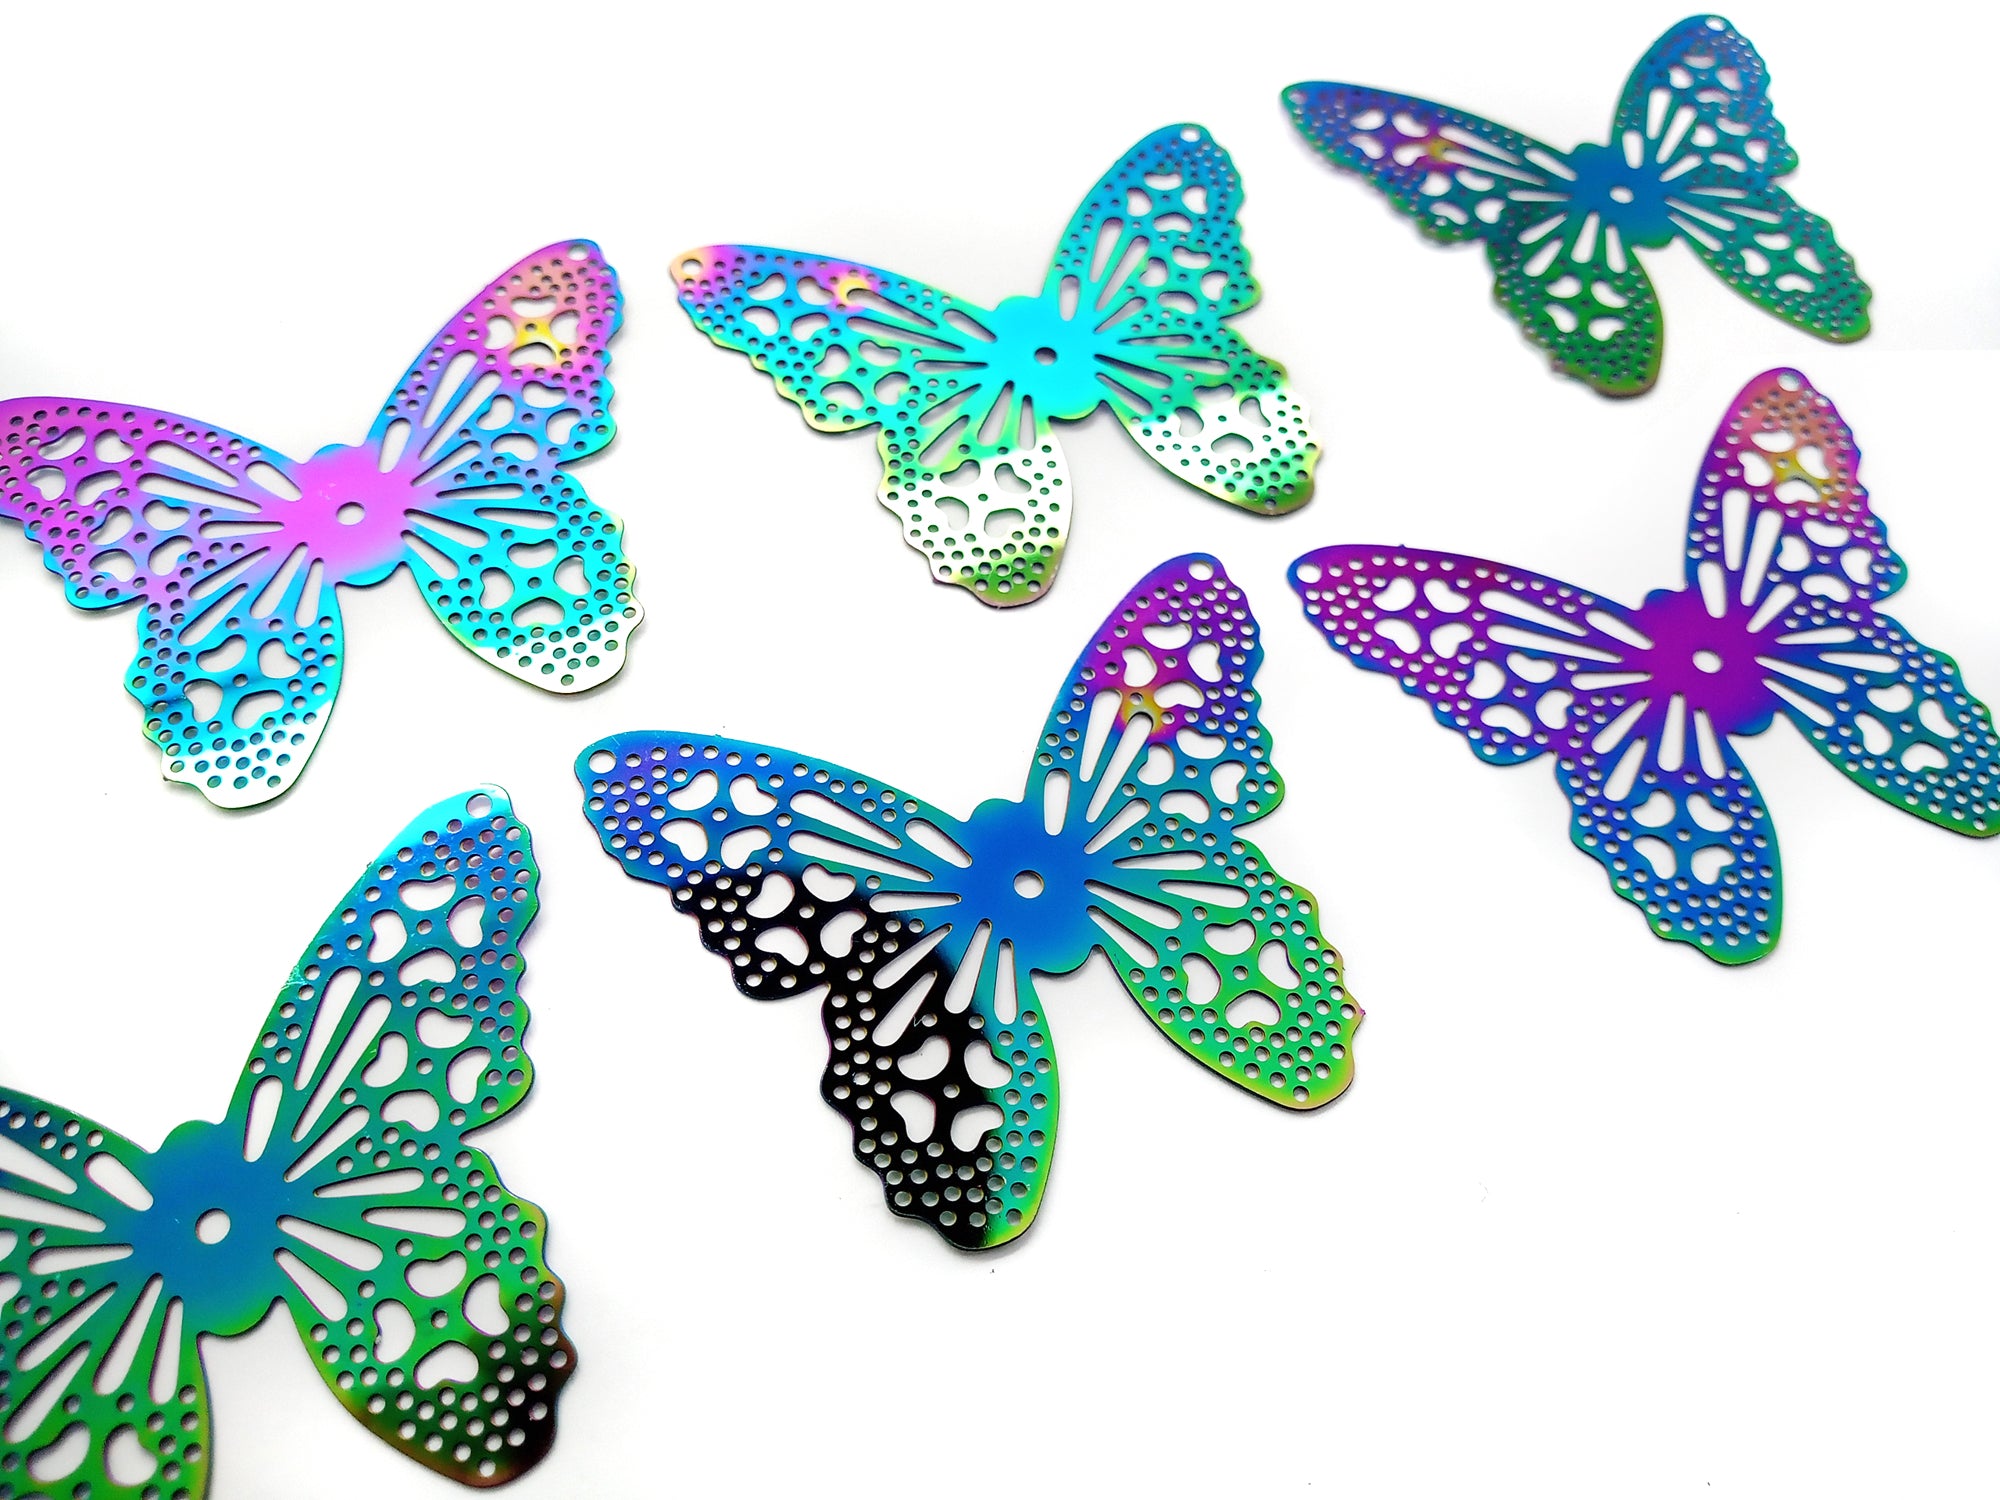 Butterfly Pendants in Rainbow Colors, 4 pieces, Stainless Steel Charms